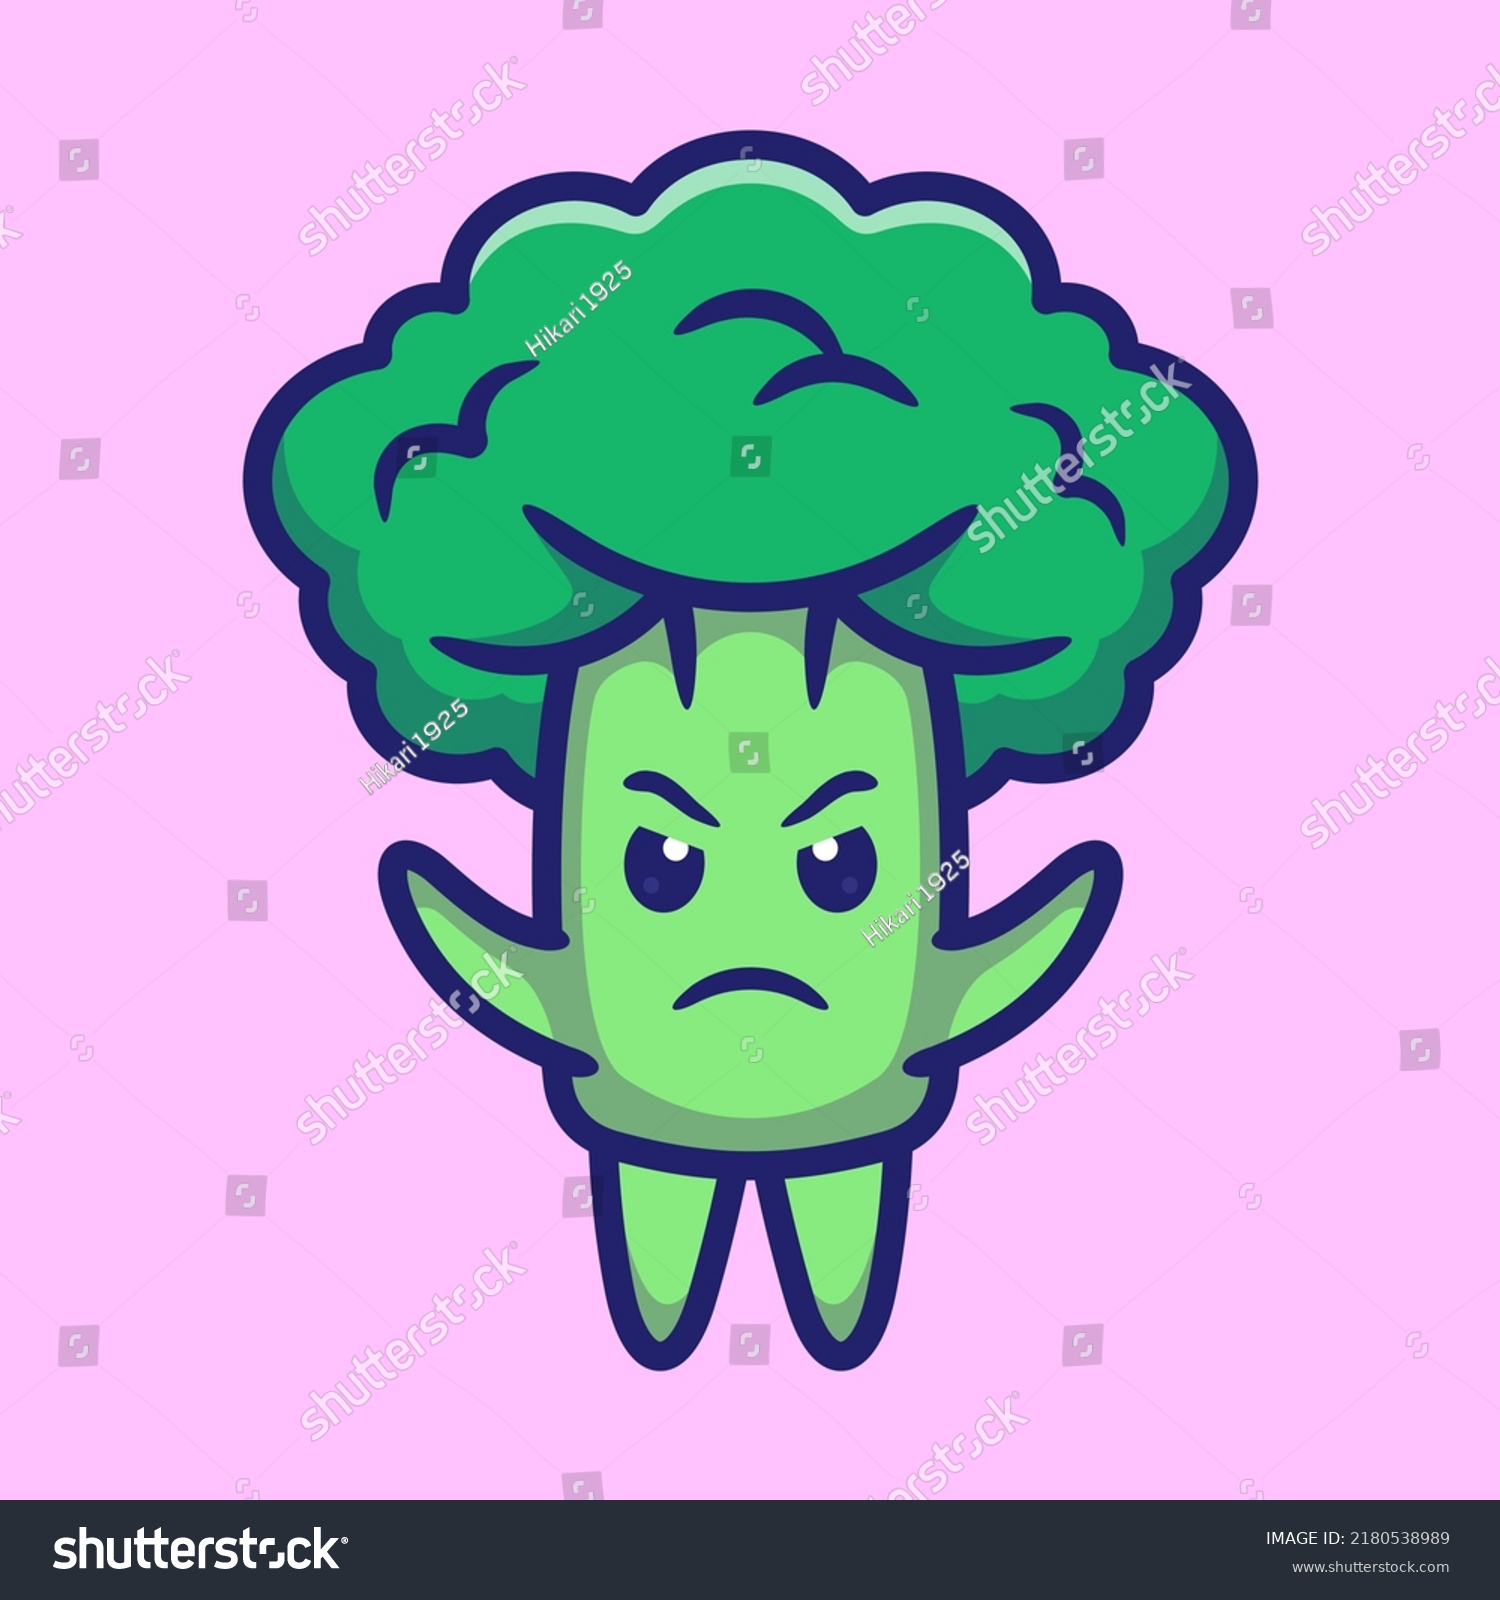 Vector Illustration Cute Broccoli Angry Face Stock Vector (Royalty Free ...